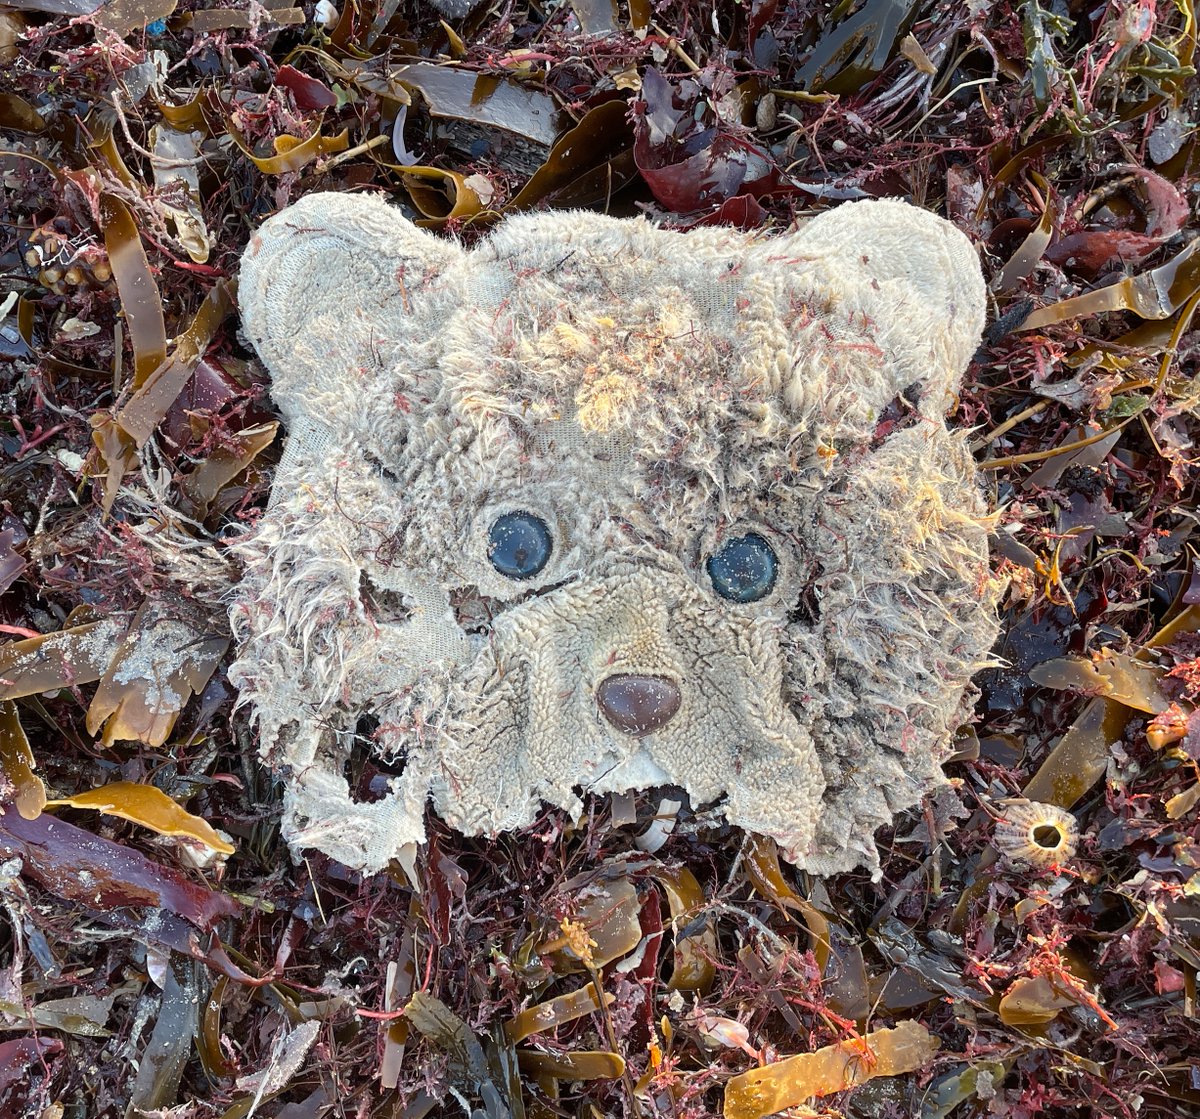 An image we took of a teddy bear's head emerging from the deep after a winter storm is to be included in a new exhibition at the Turner Contemporary. The group exhibition In The Offing has been devised by Turner Prize-winning artist @MarkLeckey. It runs from 7 Oct 23 to 14 Jan…